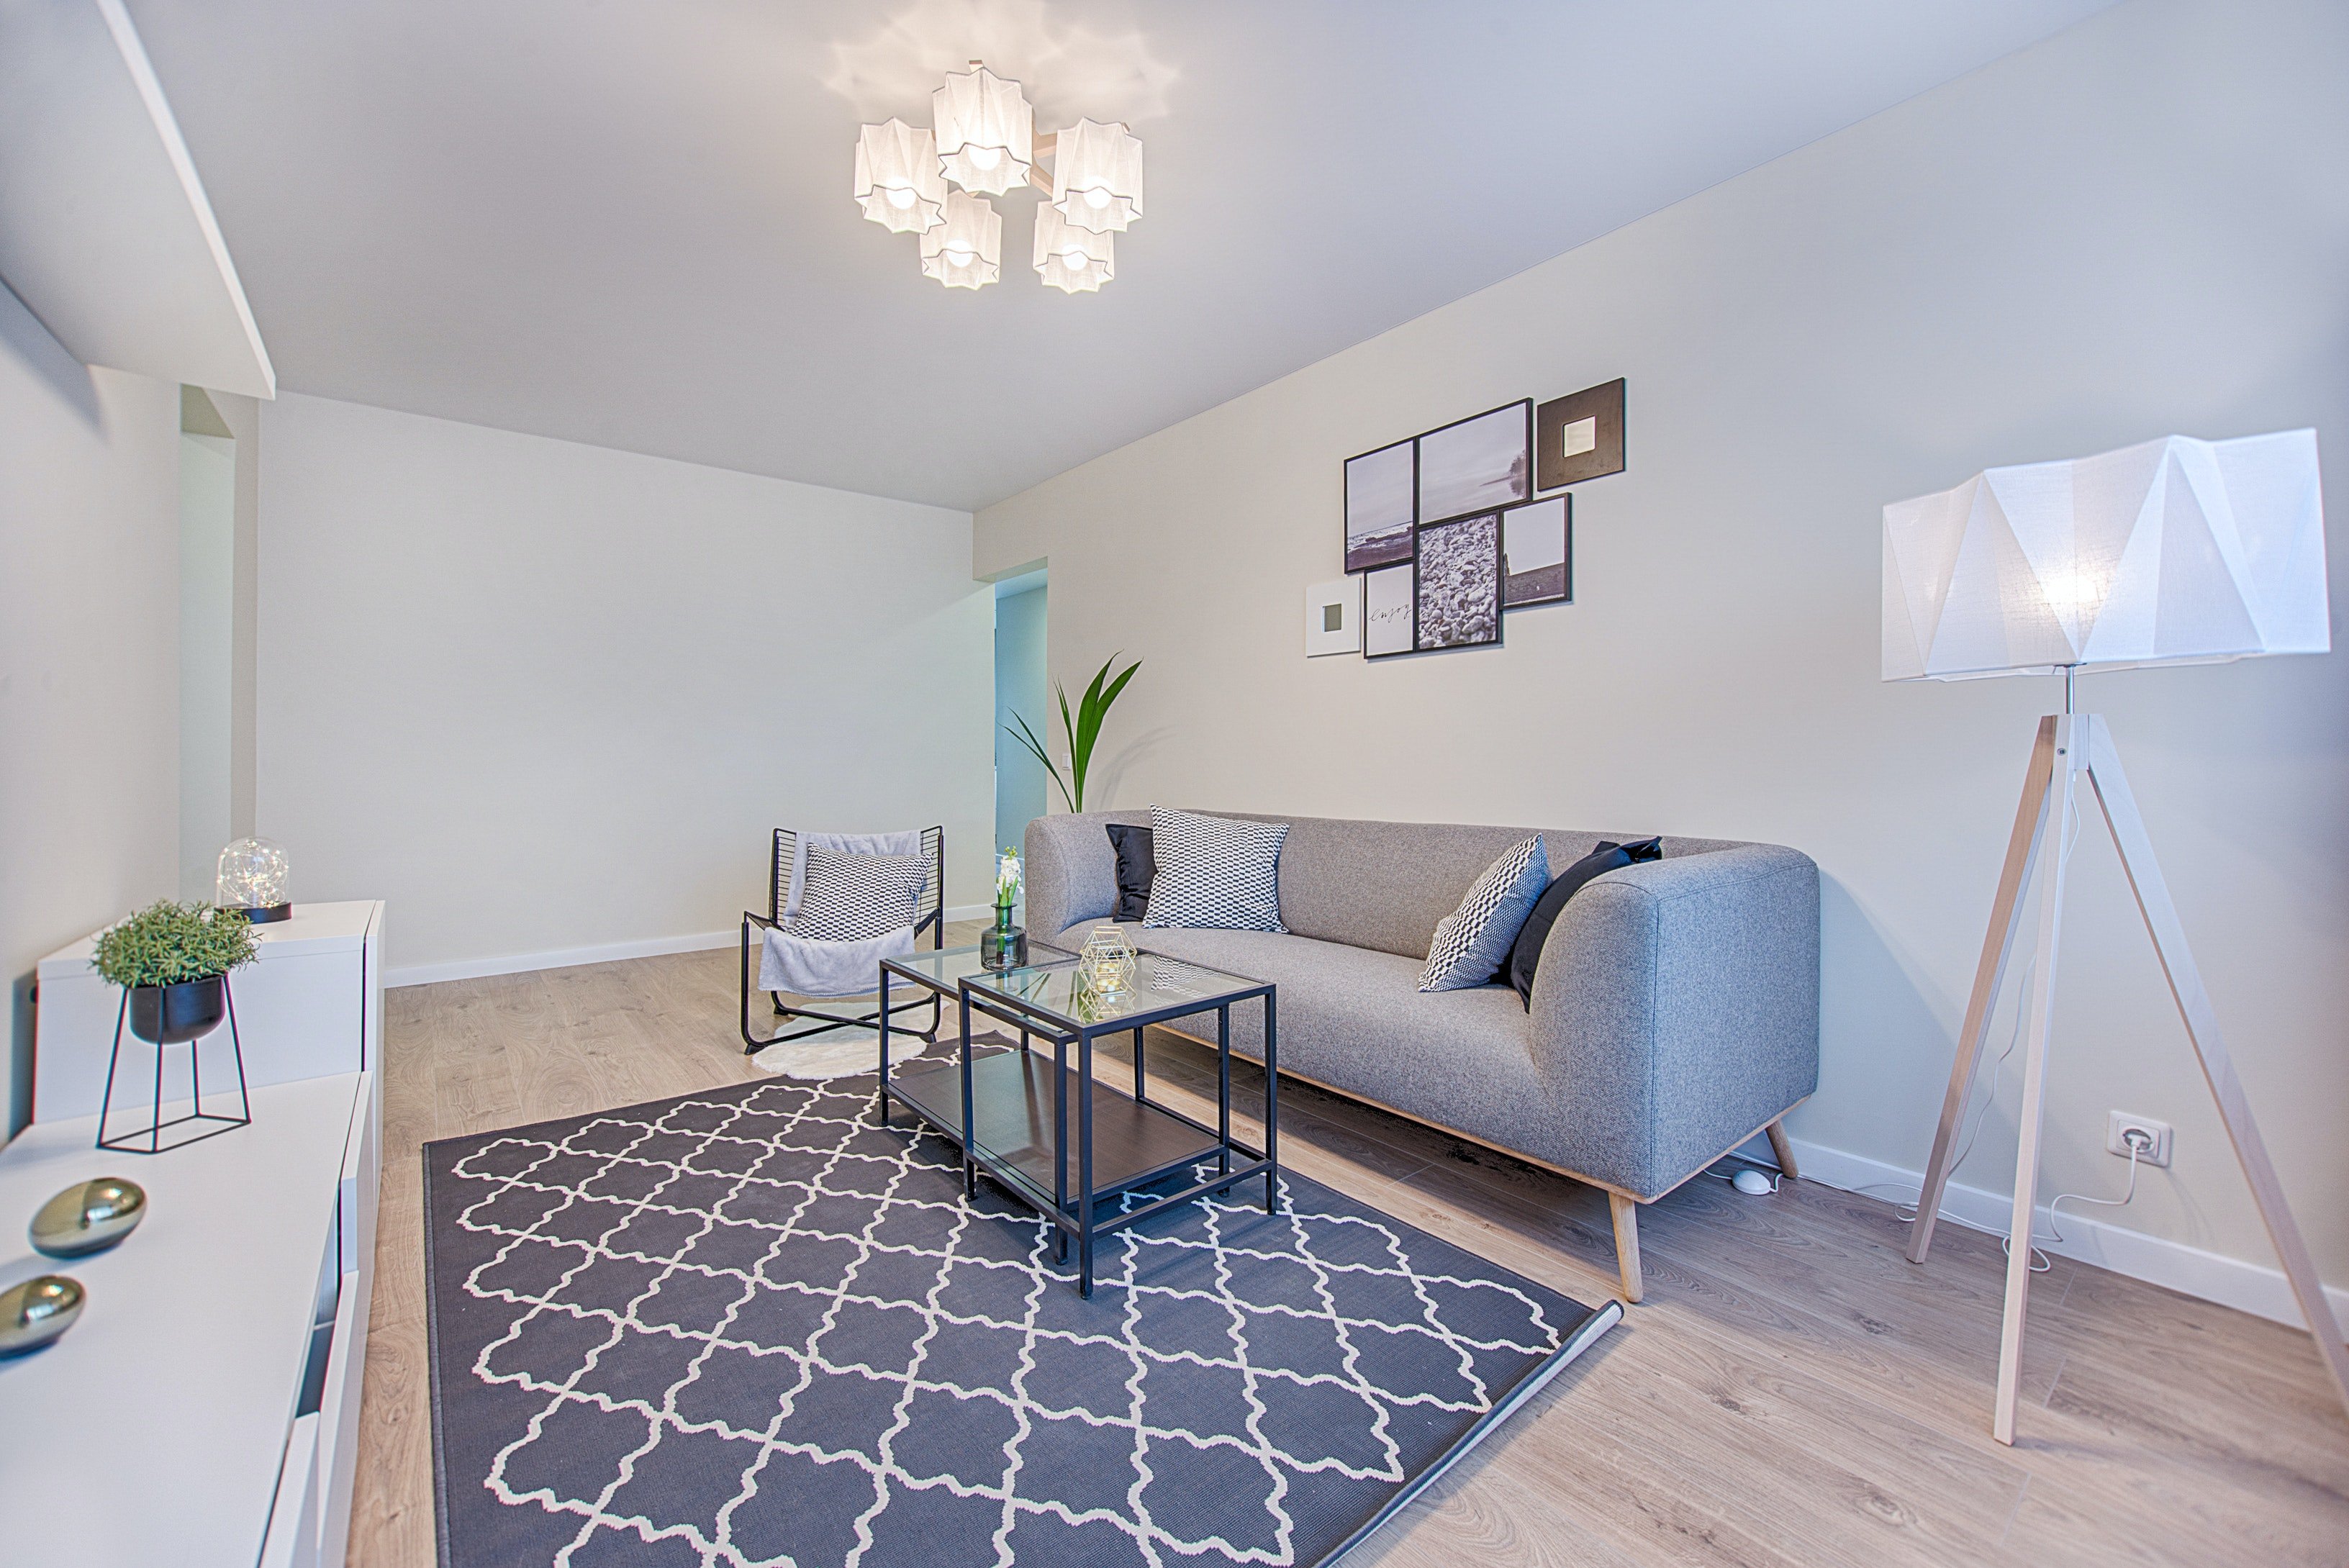 Diane received a fully-furnished apartment alongside many other donations. | Source: Pexels